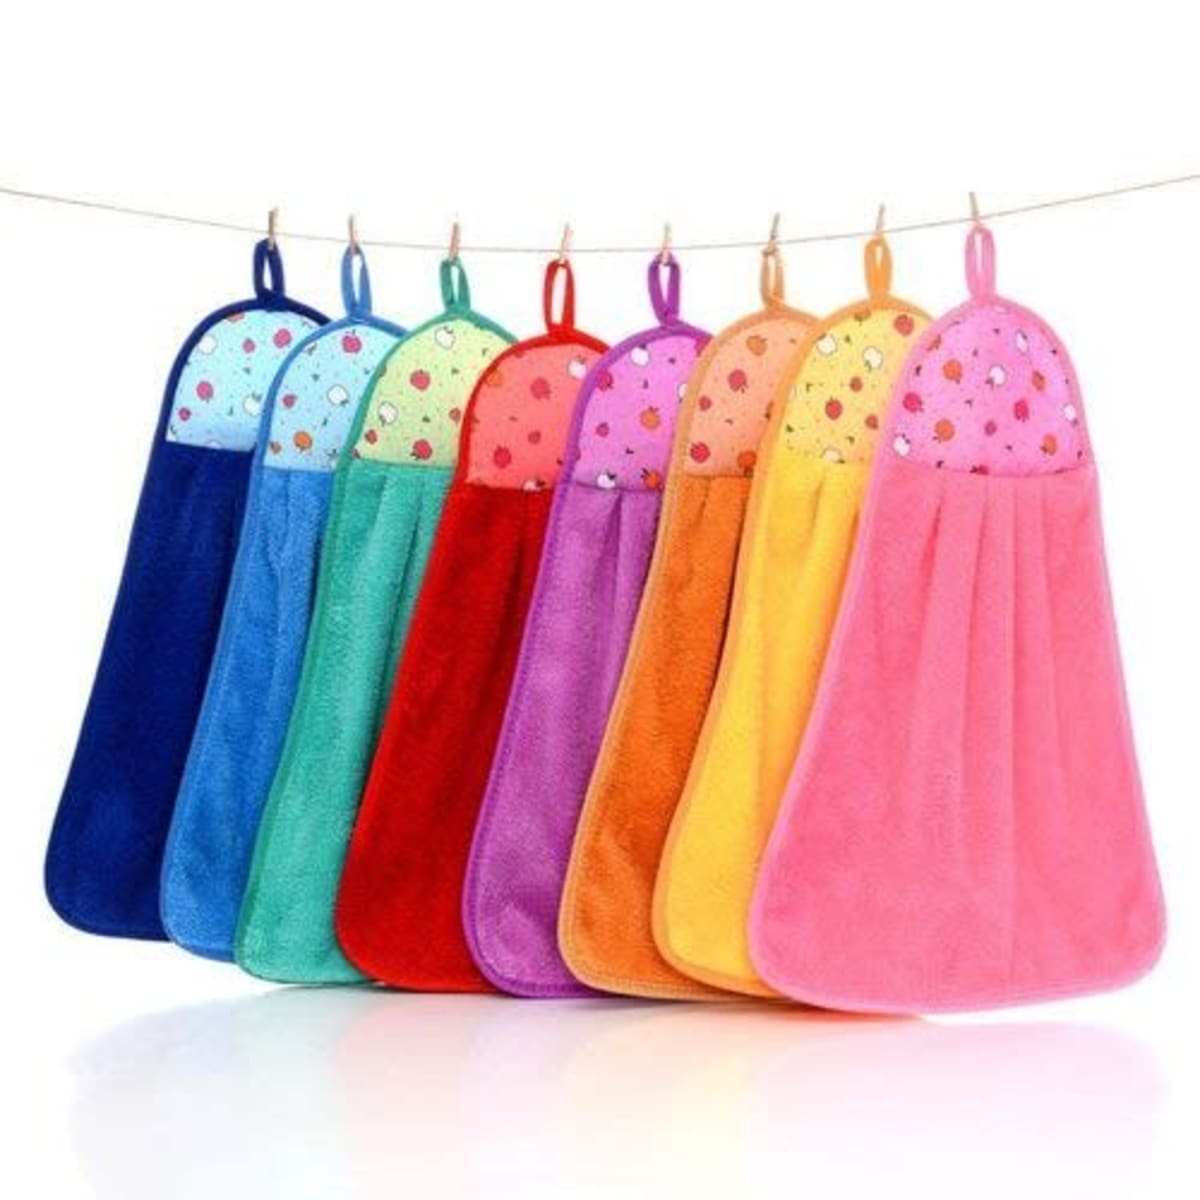 Multicolored Hanging Kitchen Towel - 6 Pieces